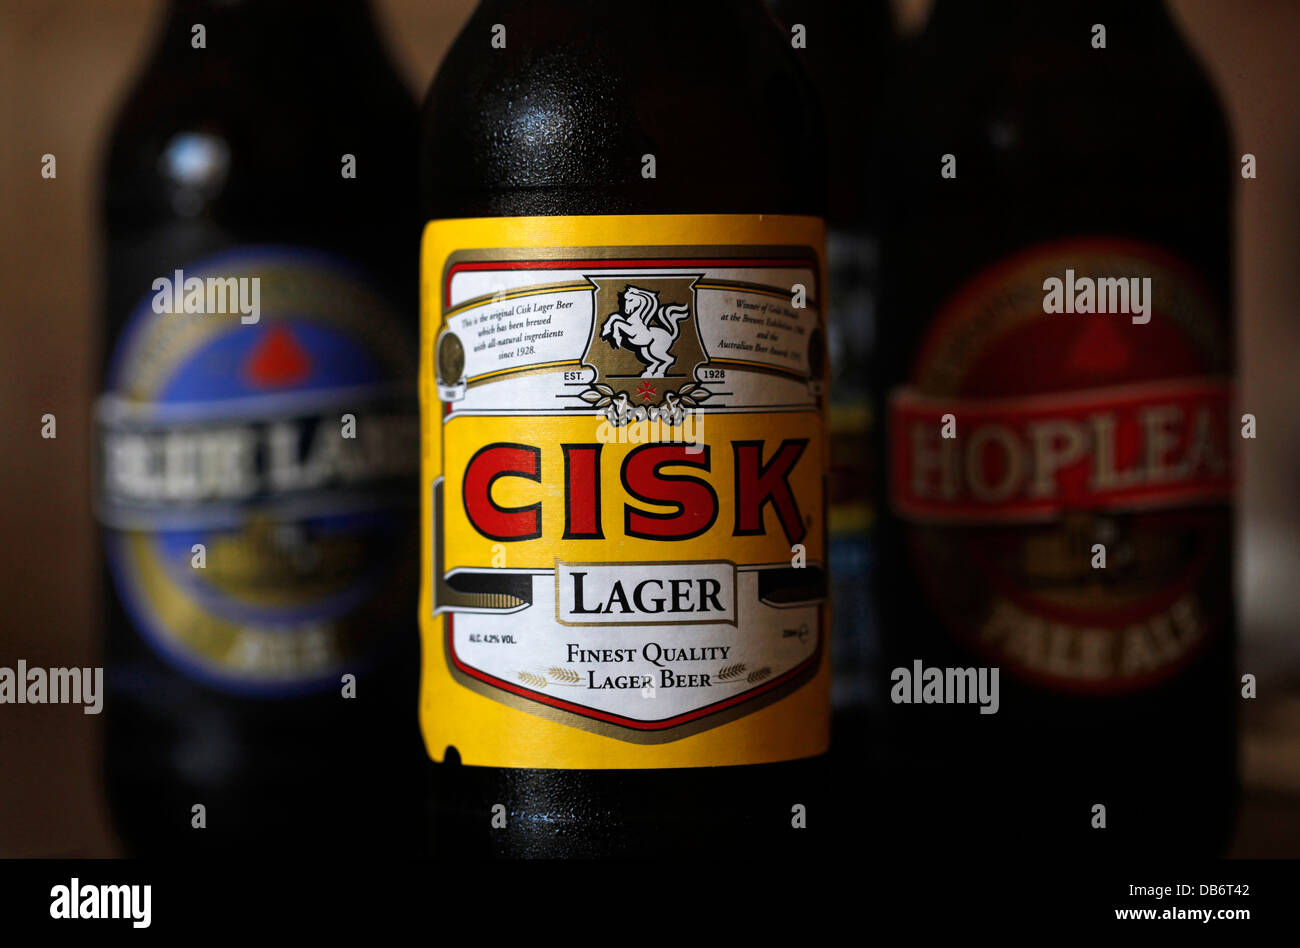 A bottle of Local Cisk Lager Beer in Malta Stock Photo